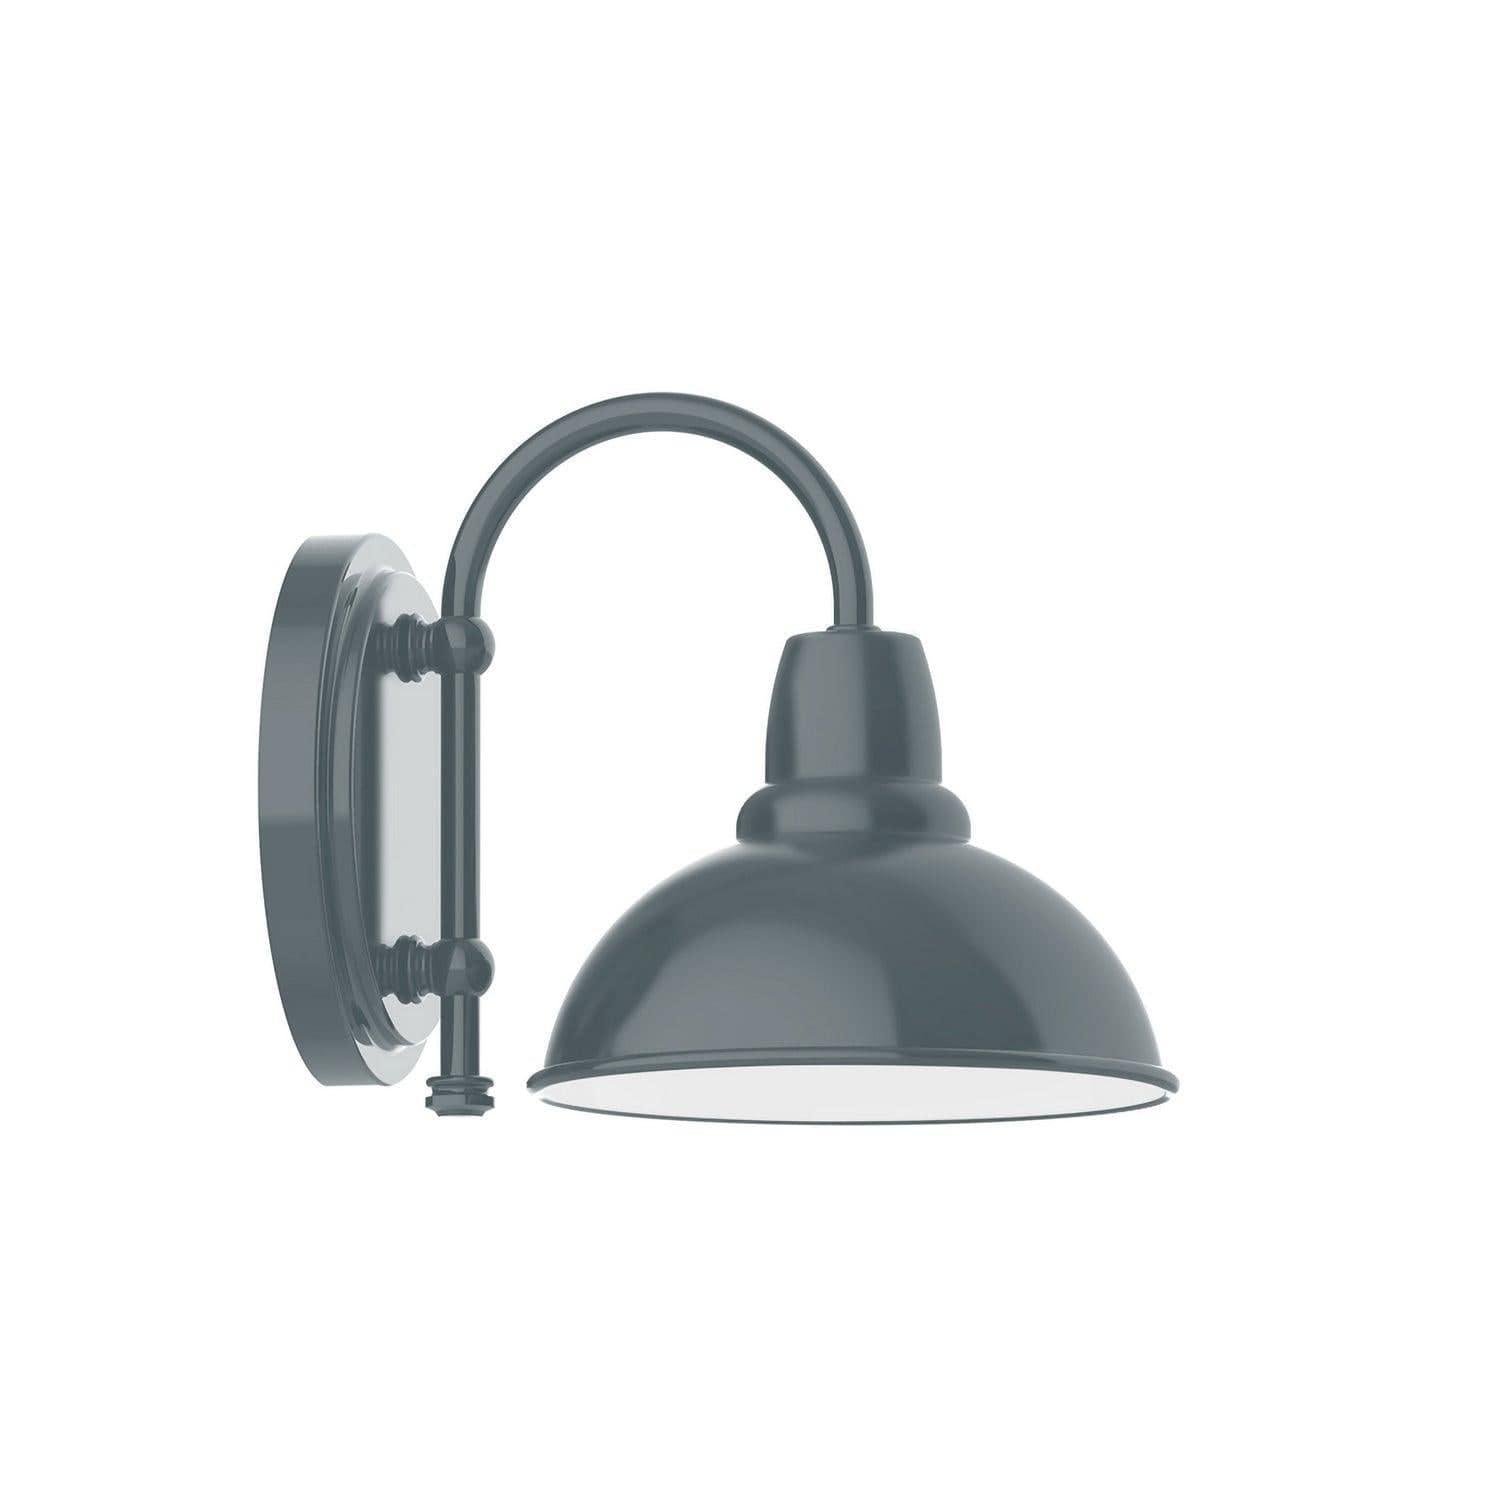 Montclair Light Works - Cafe 8" Wall Sconce - SCB105-40 | Montreal Lighting & Hardware